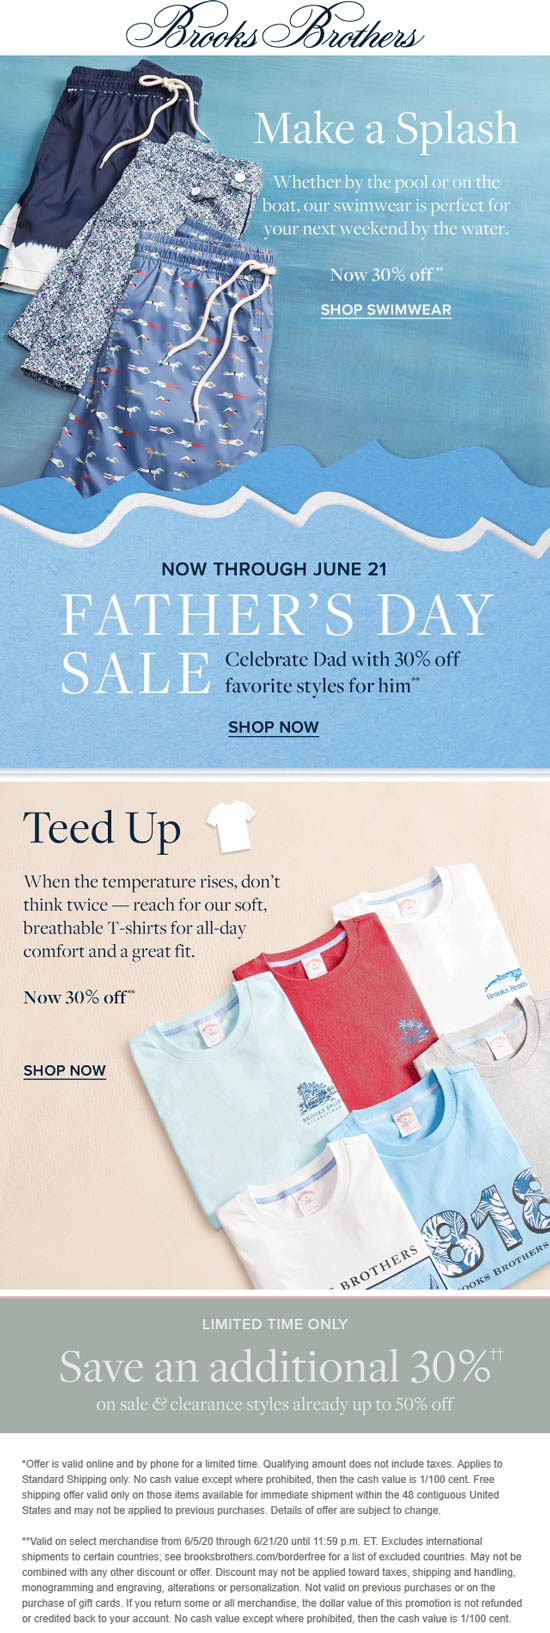 Brooks Brothers stores Coupon  30% off swimwear & tees at Brooks Brothers #brooksbrothers